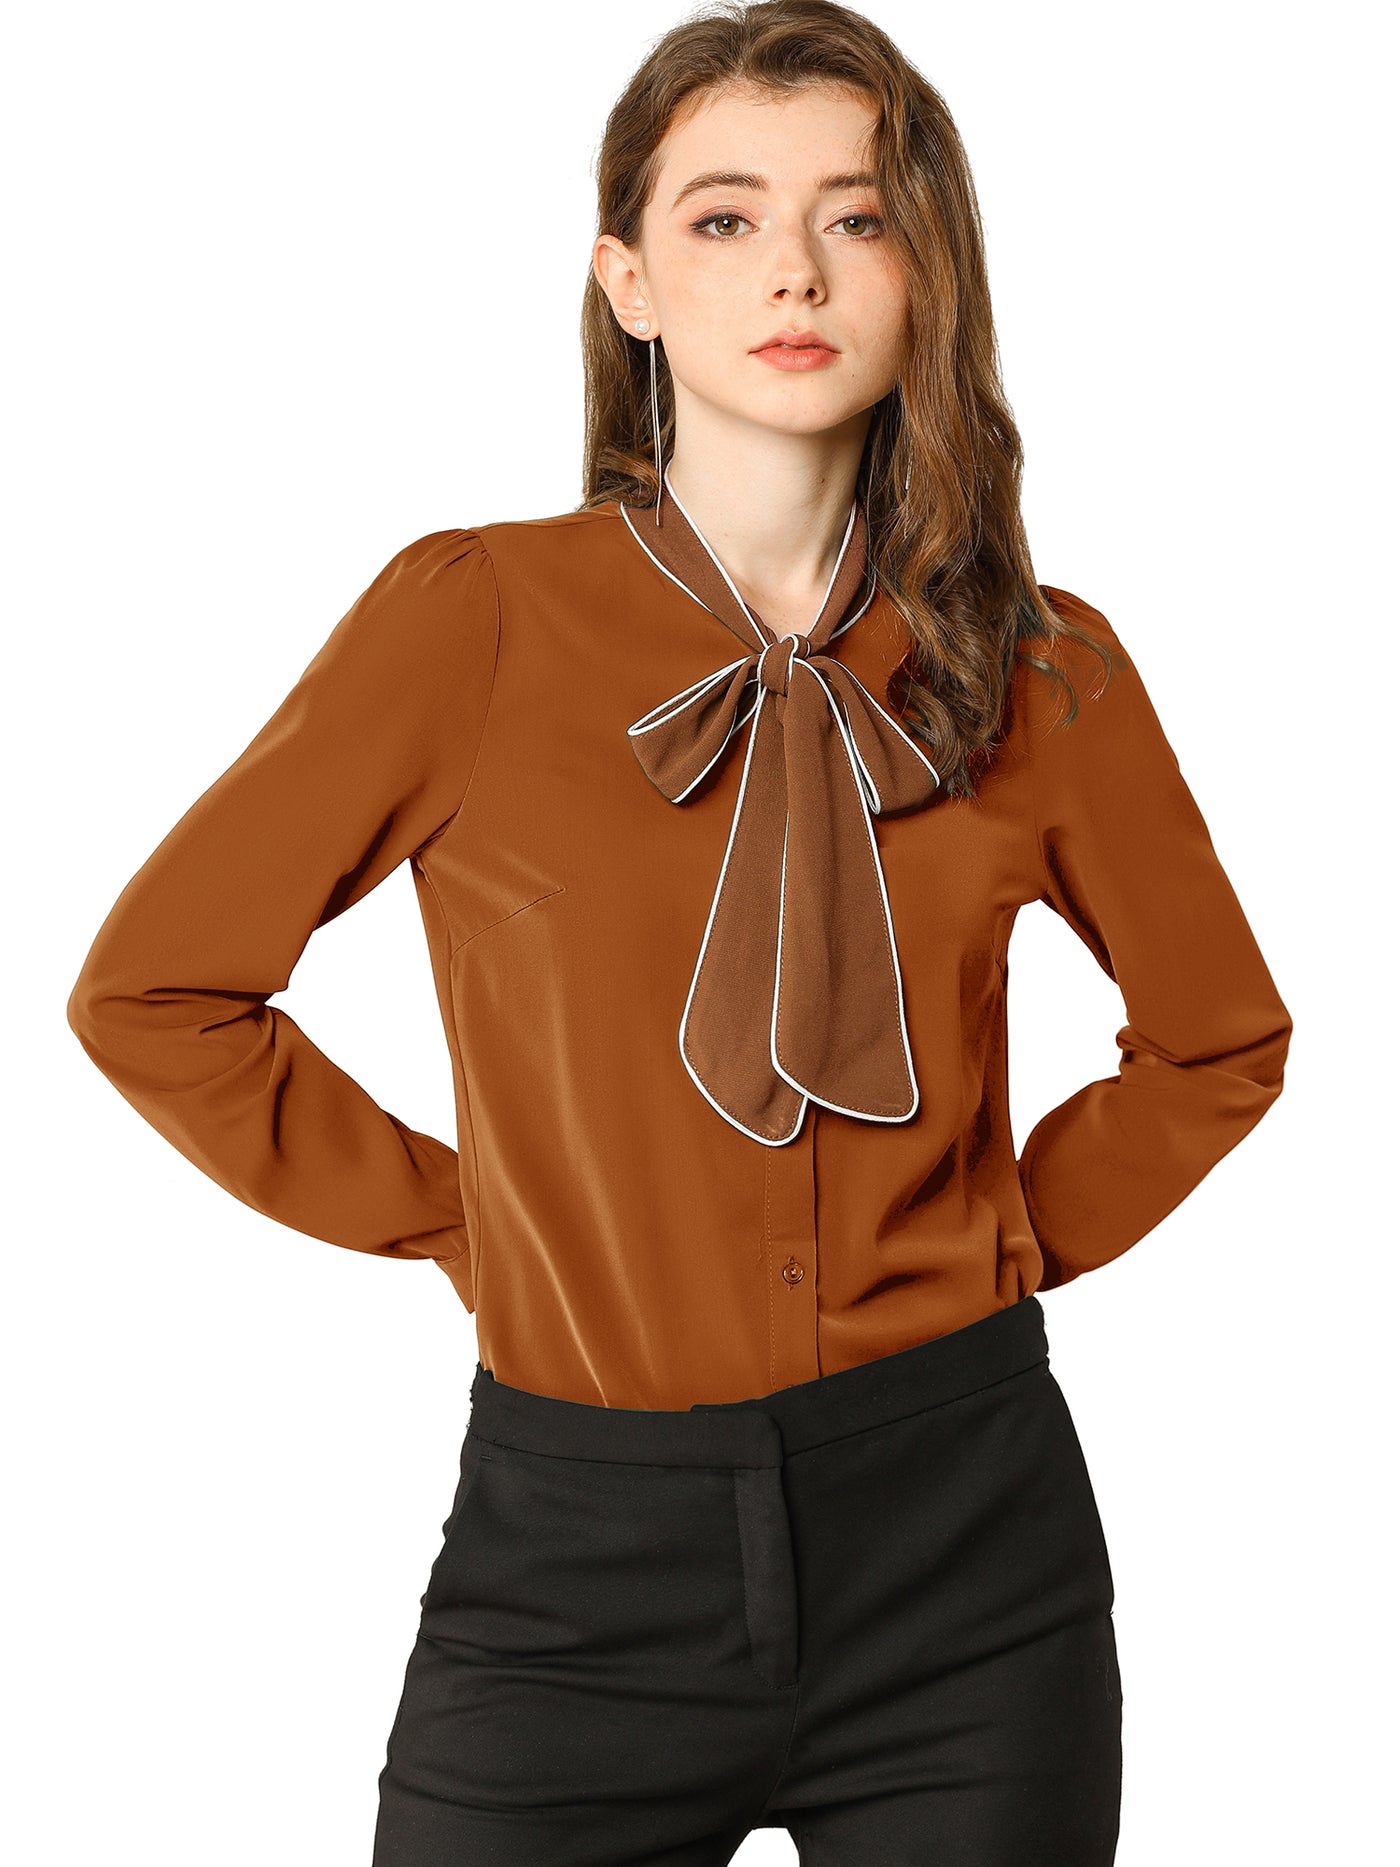 Allegra K Tie Neck Contrast Color Button Down Long Sleeve Valentine's Day Shirt